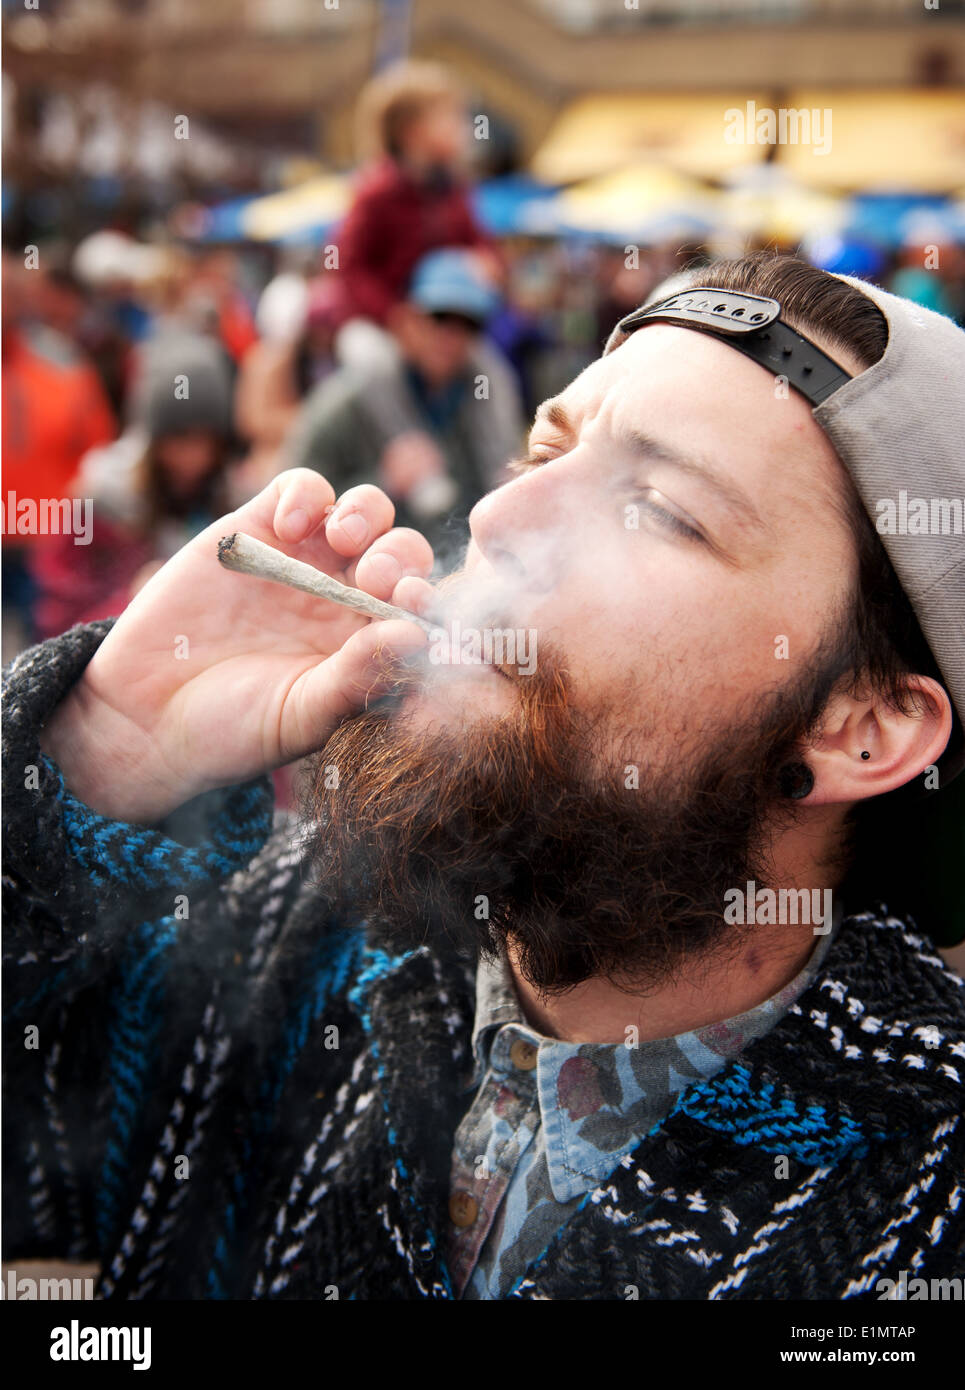 A man lights a marijuana cigarette, or joint, during a 420 day celebration in the Whistler village. Whistler BC, Canada. Stock Photo